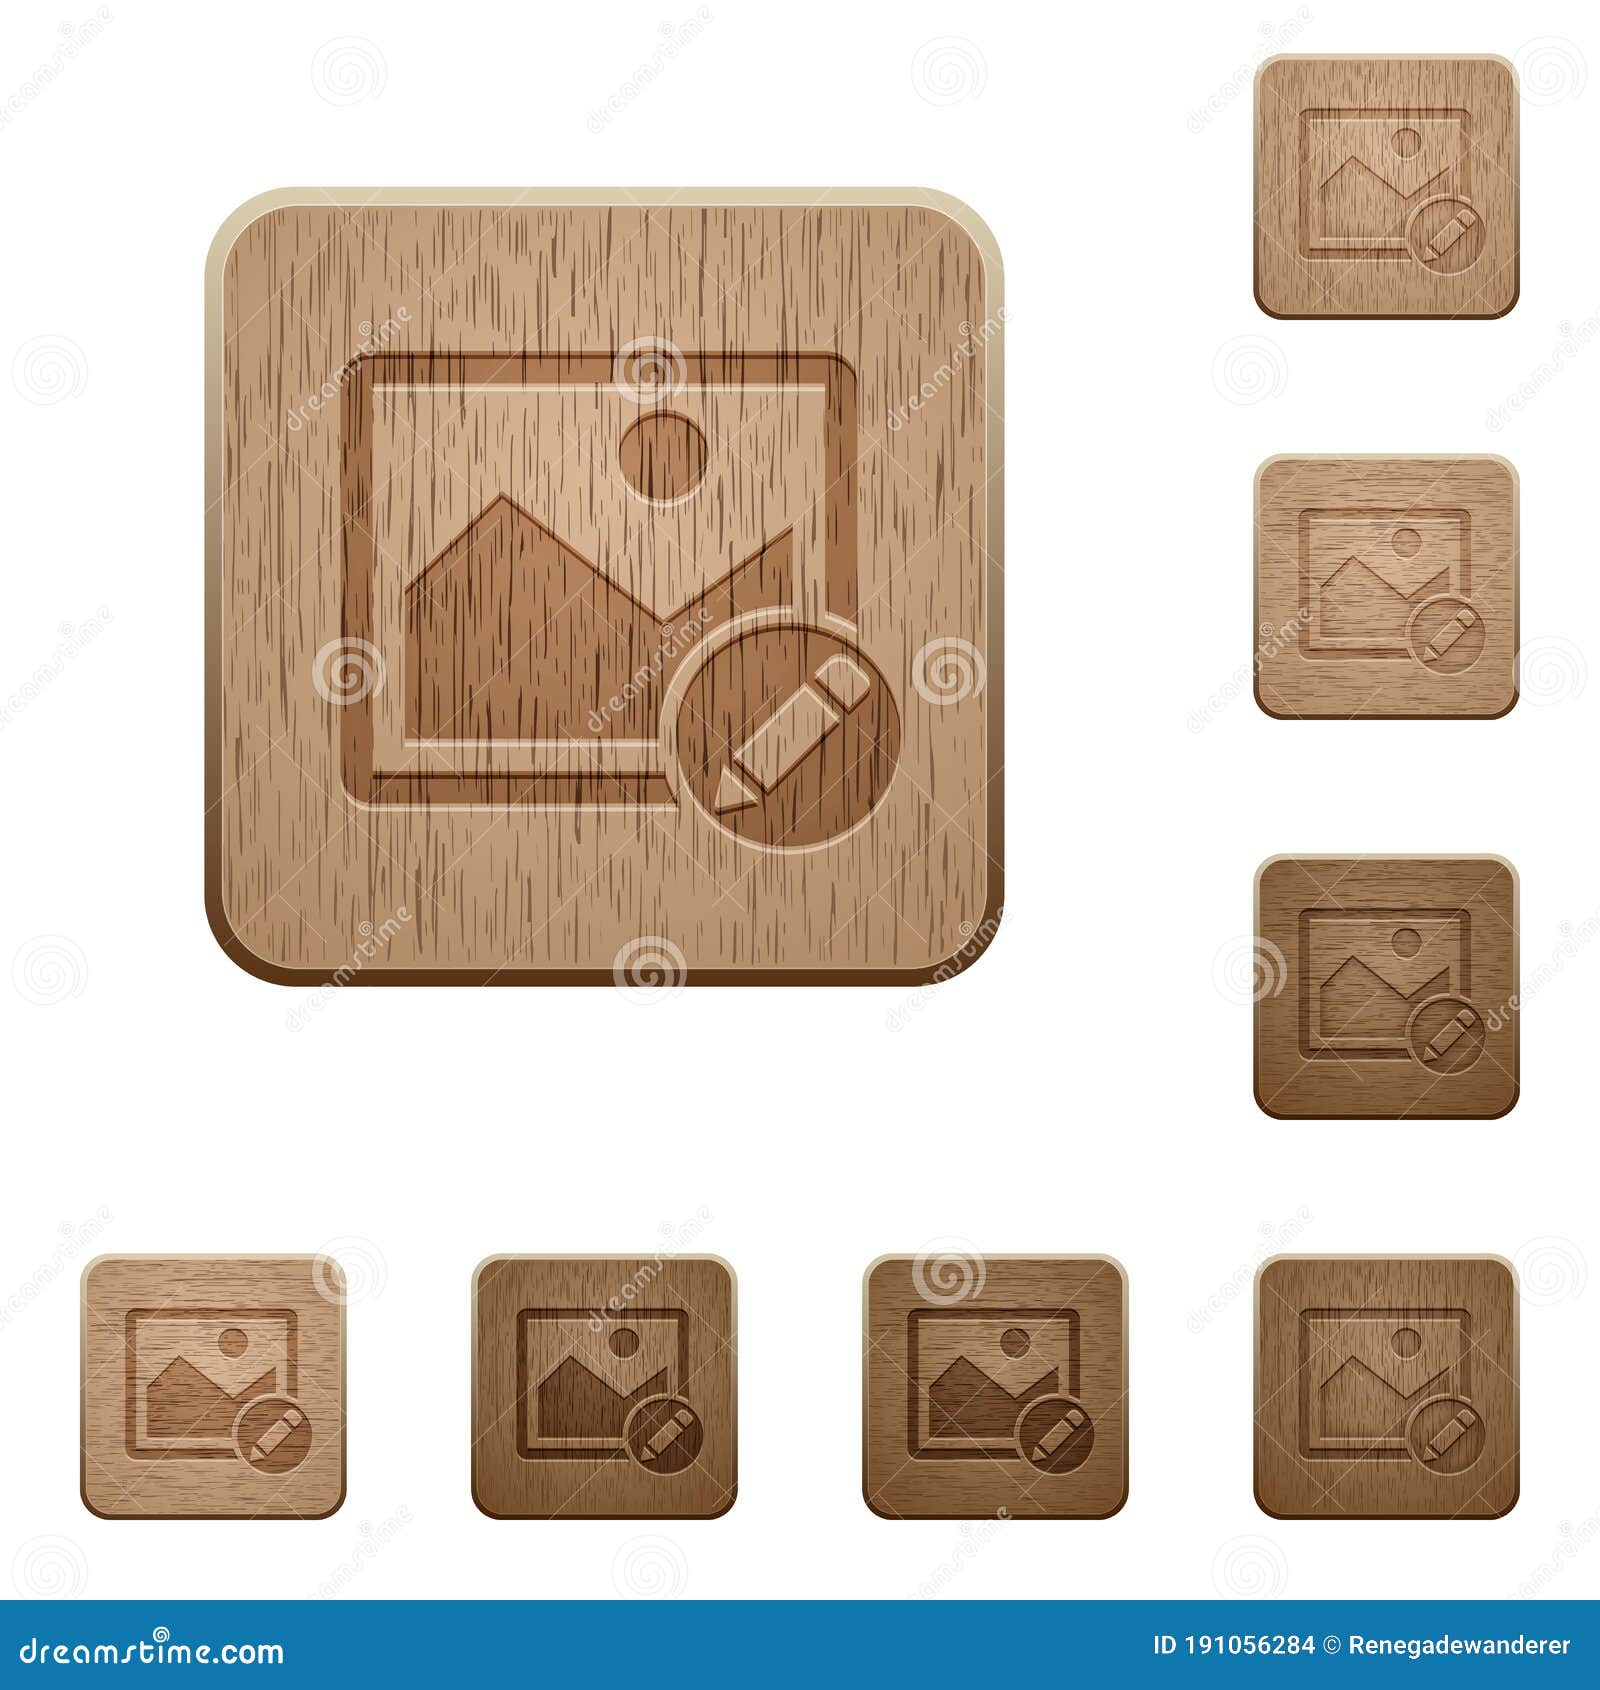 rename image wooden buttons